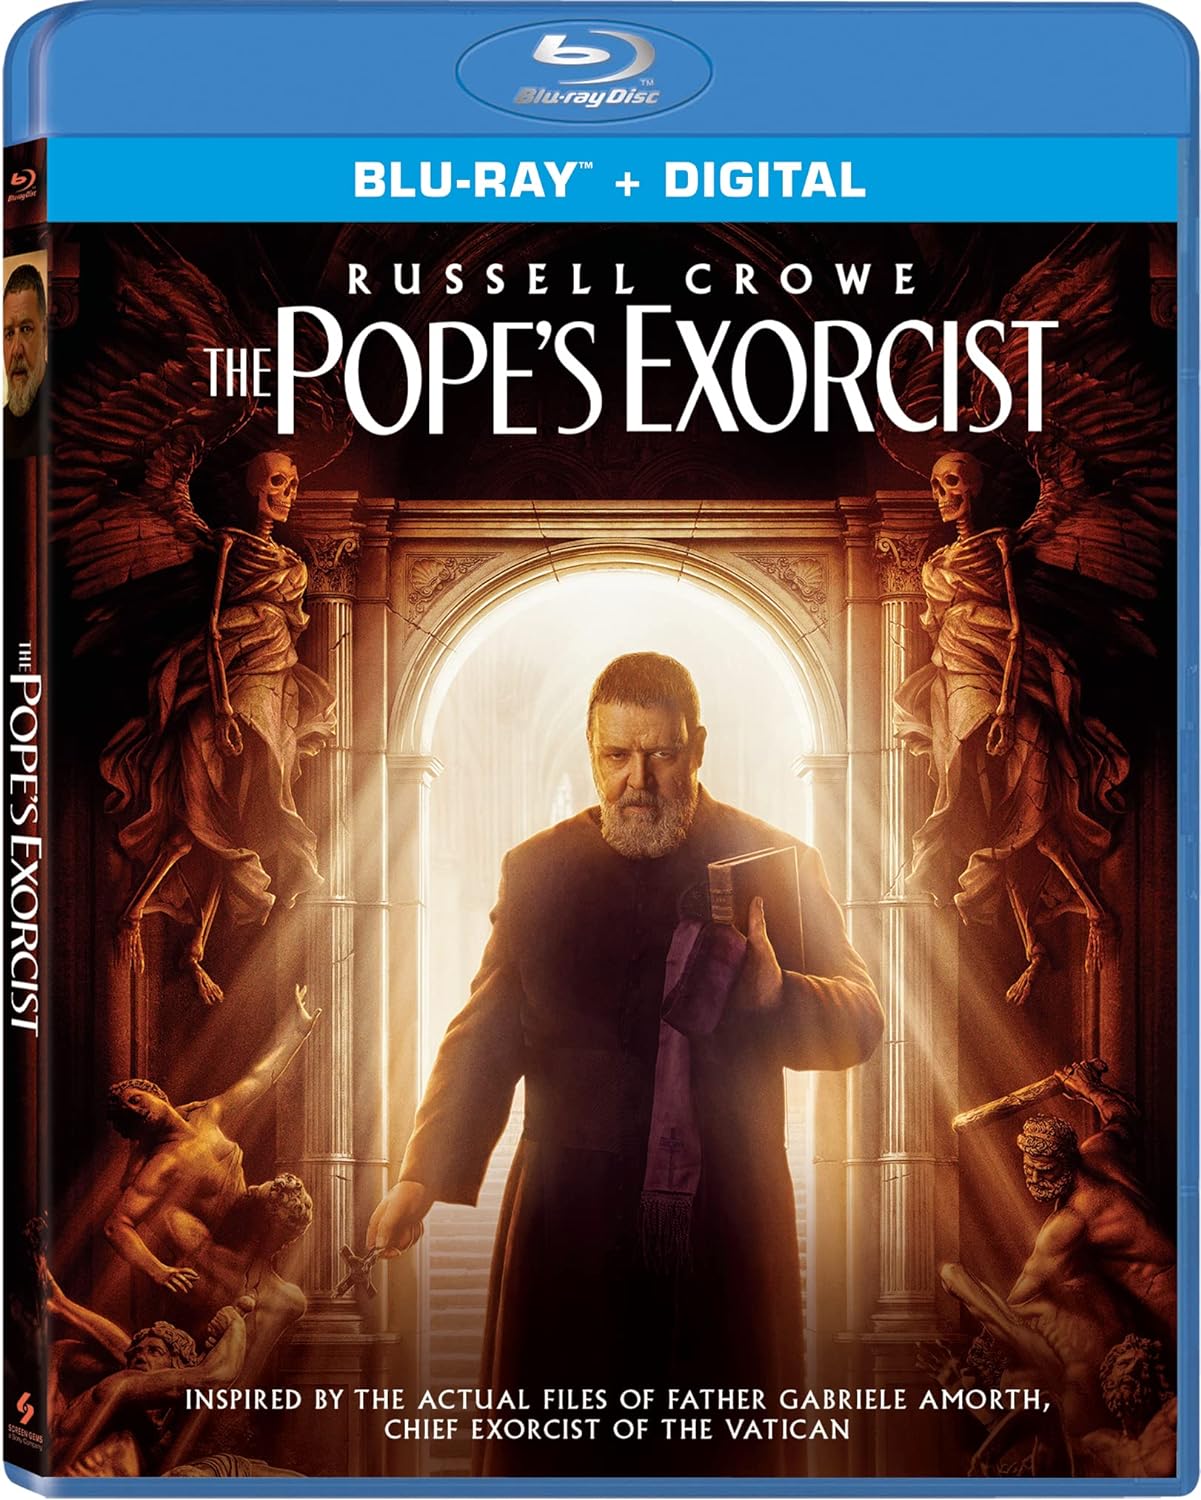 The Pope’s Exorcist HD Code (Movies Anywhere)